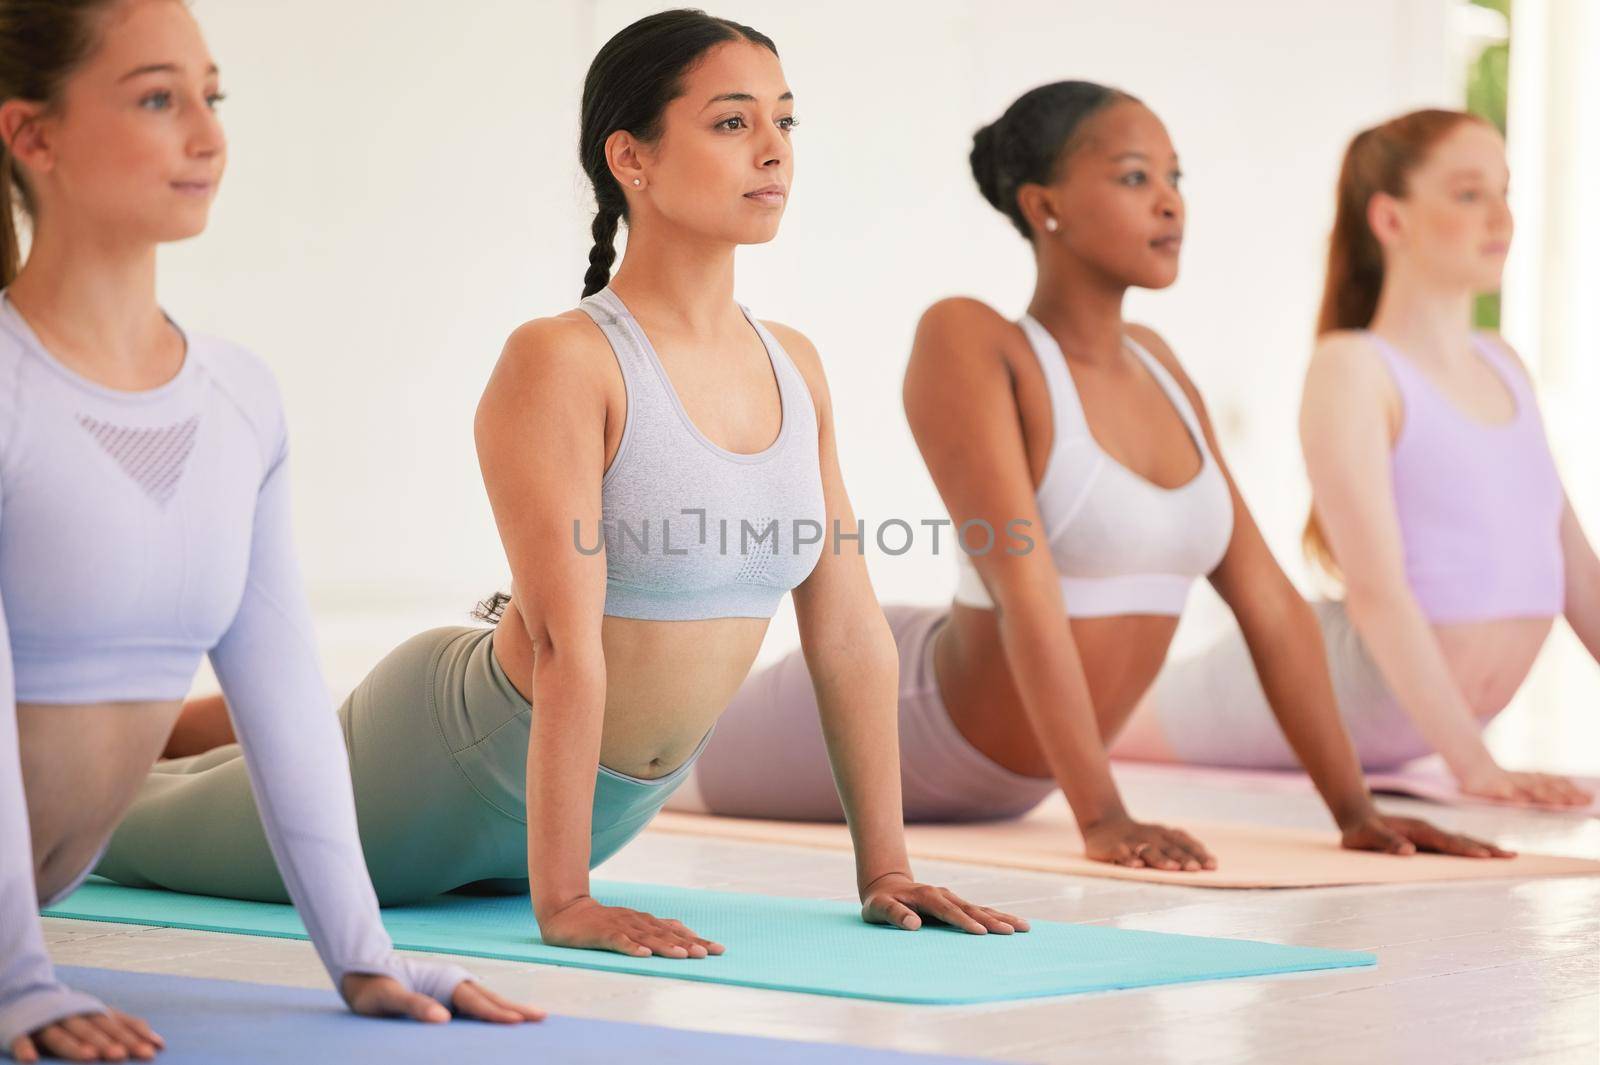 Yoga, stretching or pilates friends class for diverse group of women in upward facing dog pose in studio. Fit, calm or zen and serene or relaxed females in healthy holistic exercise for back mobility.